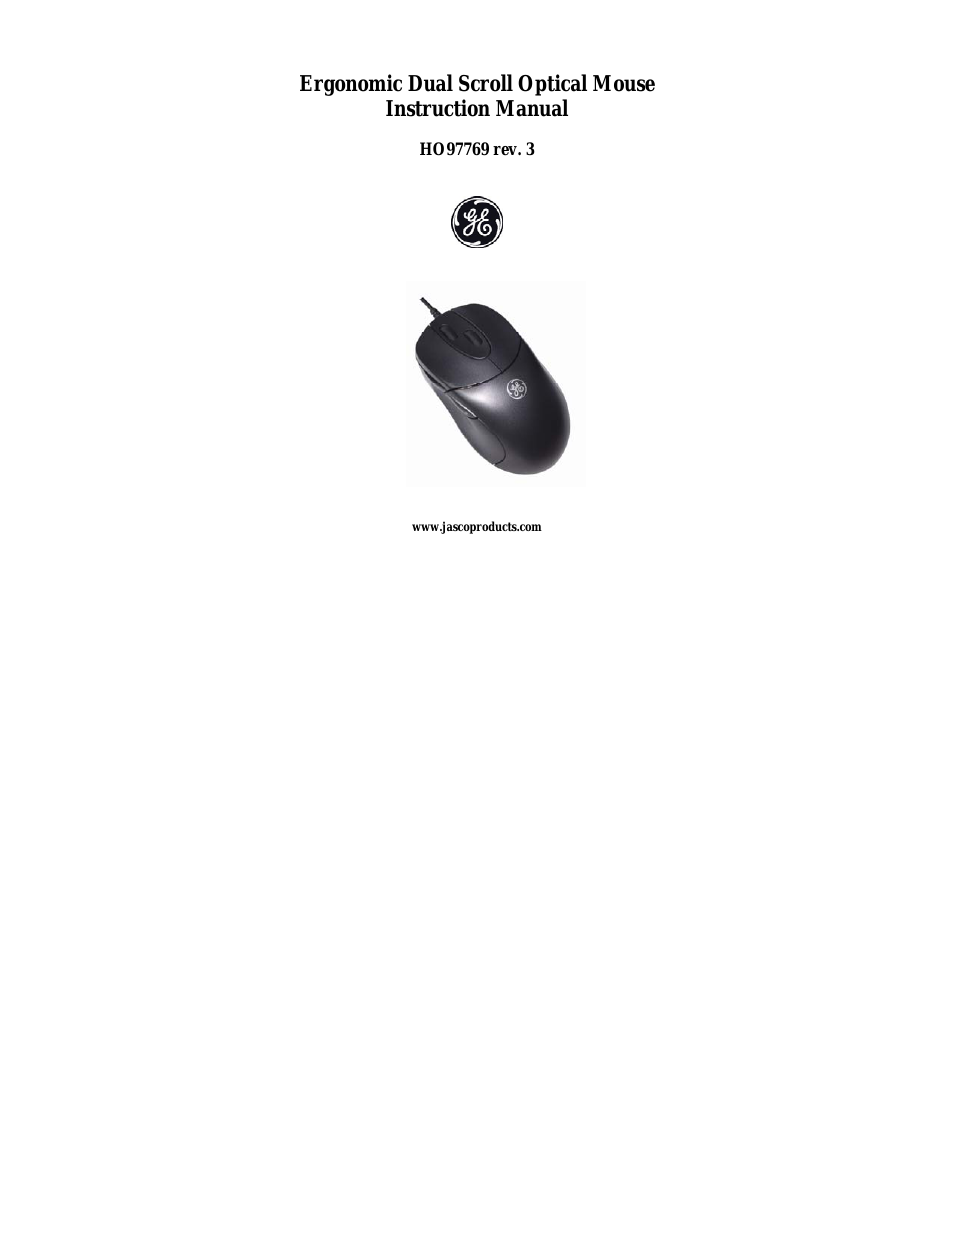 97769 GE Wired Dual Scroll Optical Mouse for PCs